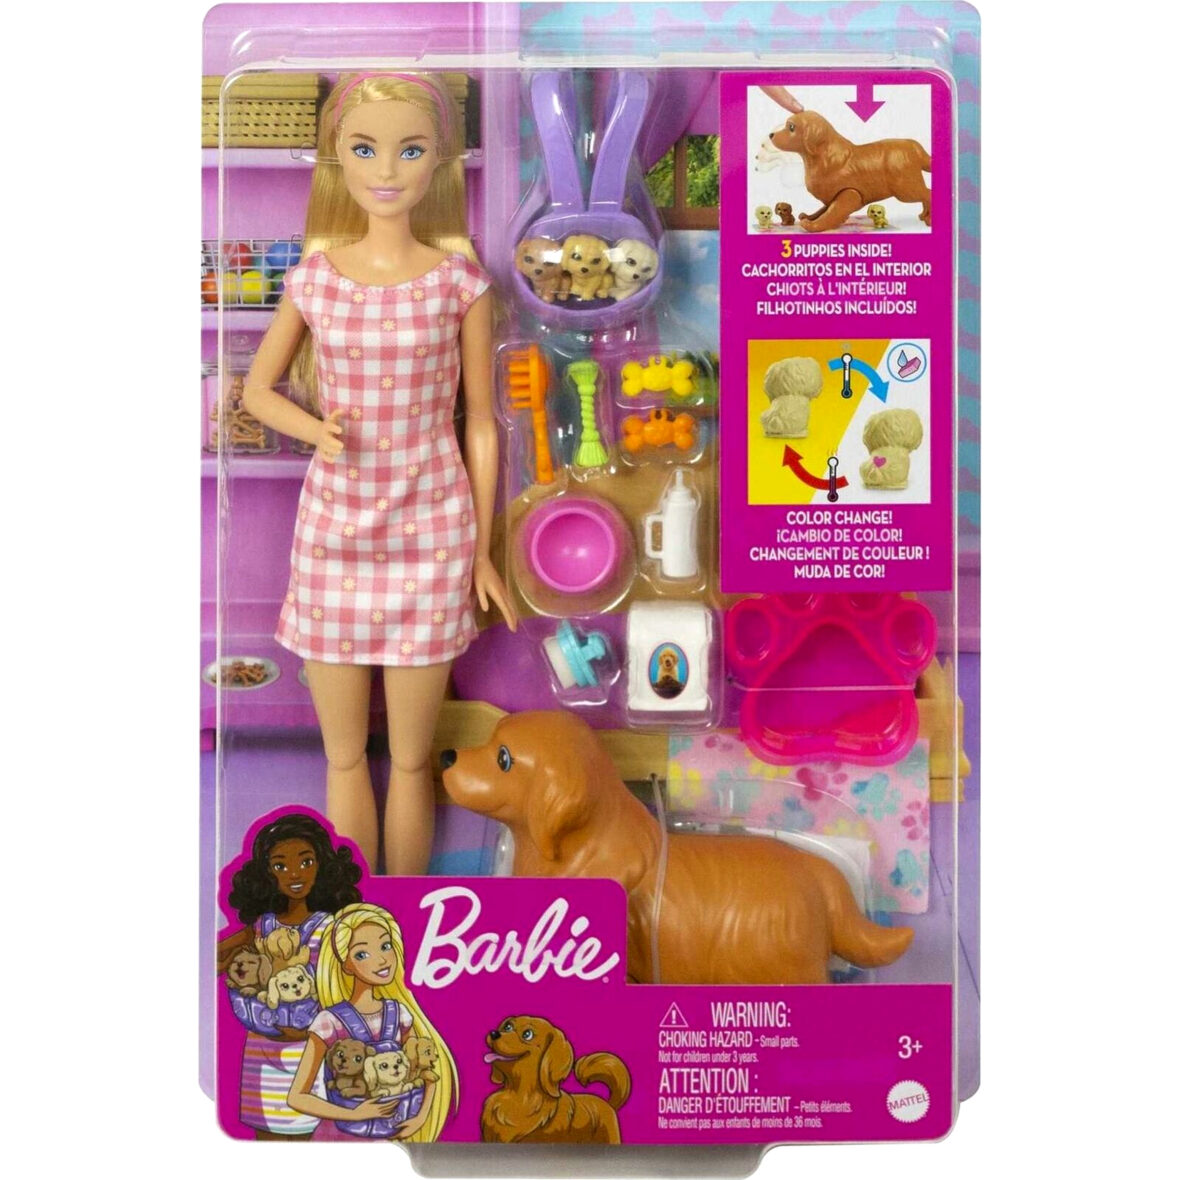 Barbie Doll and Newborn Pups Playset with Dog, 3 Puppies & Accessories-HCK74